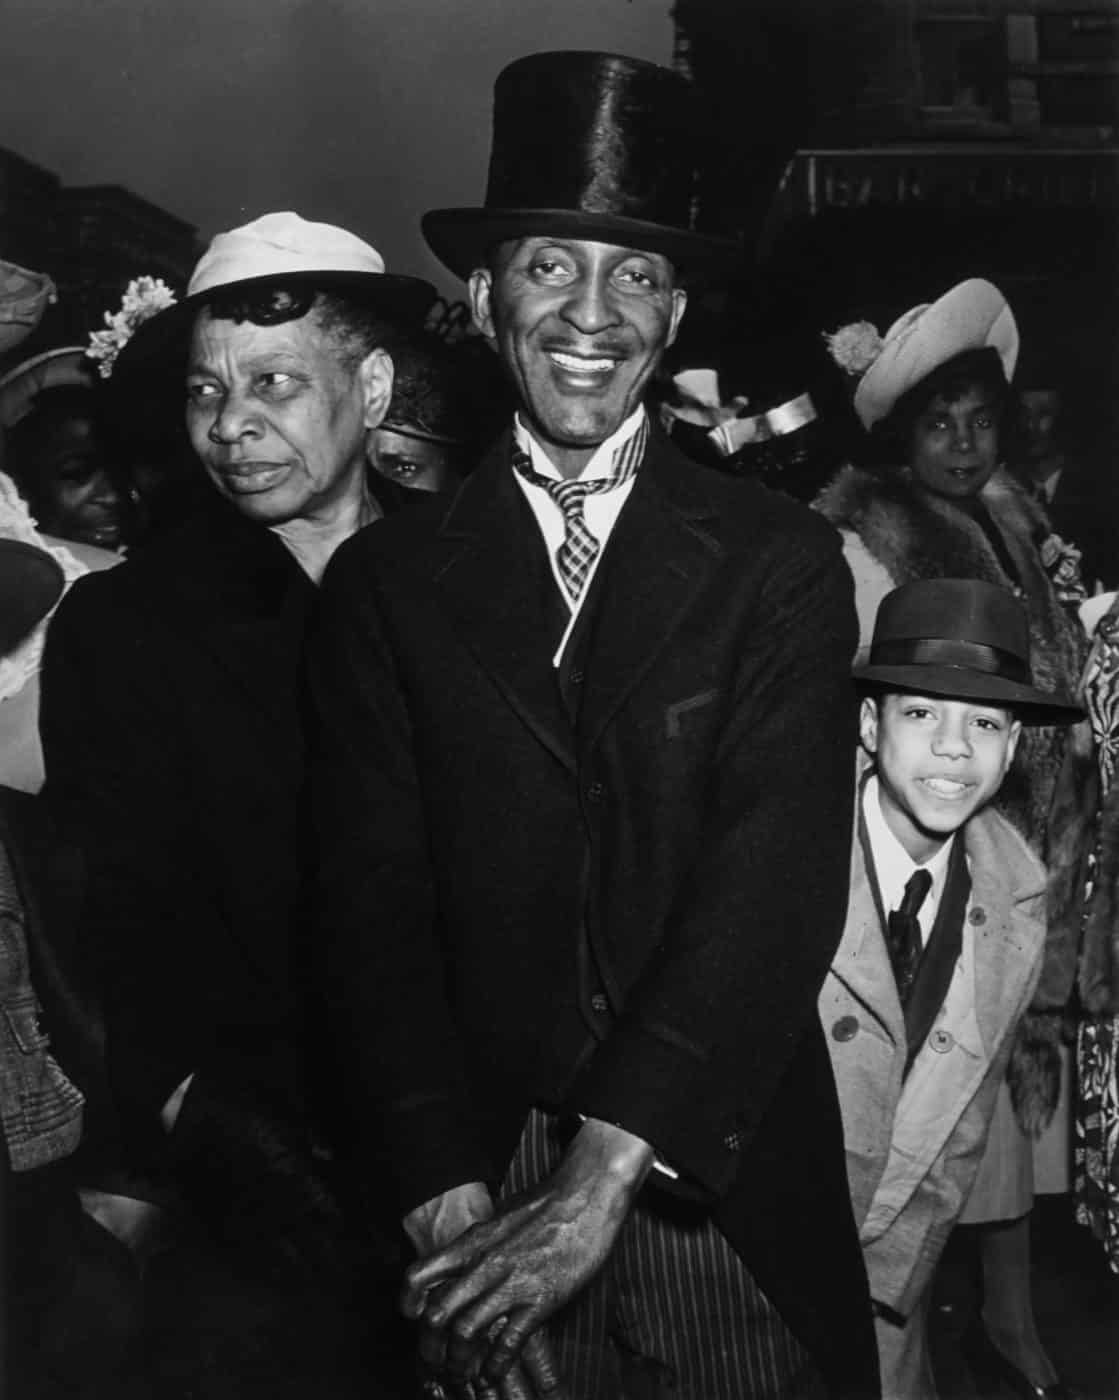 Easter Sunday in Harlem, 1940, by Weegee